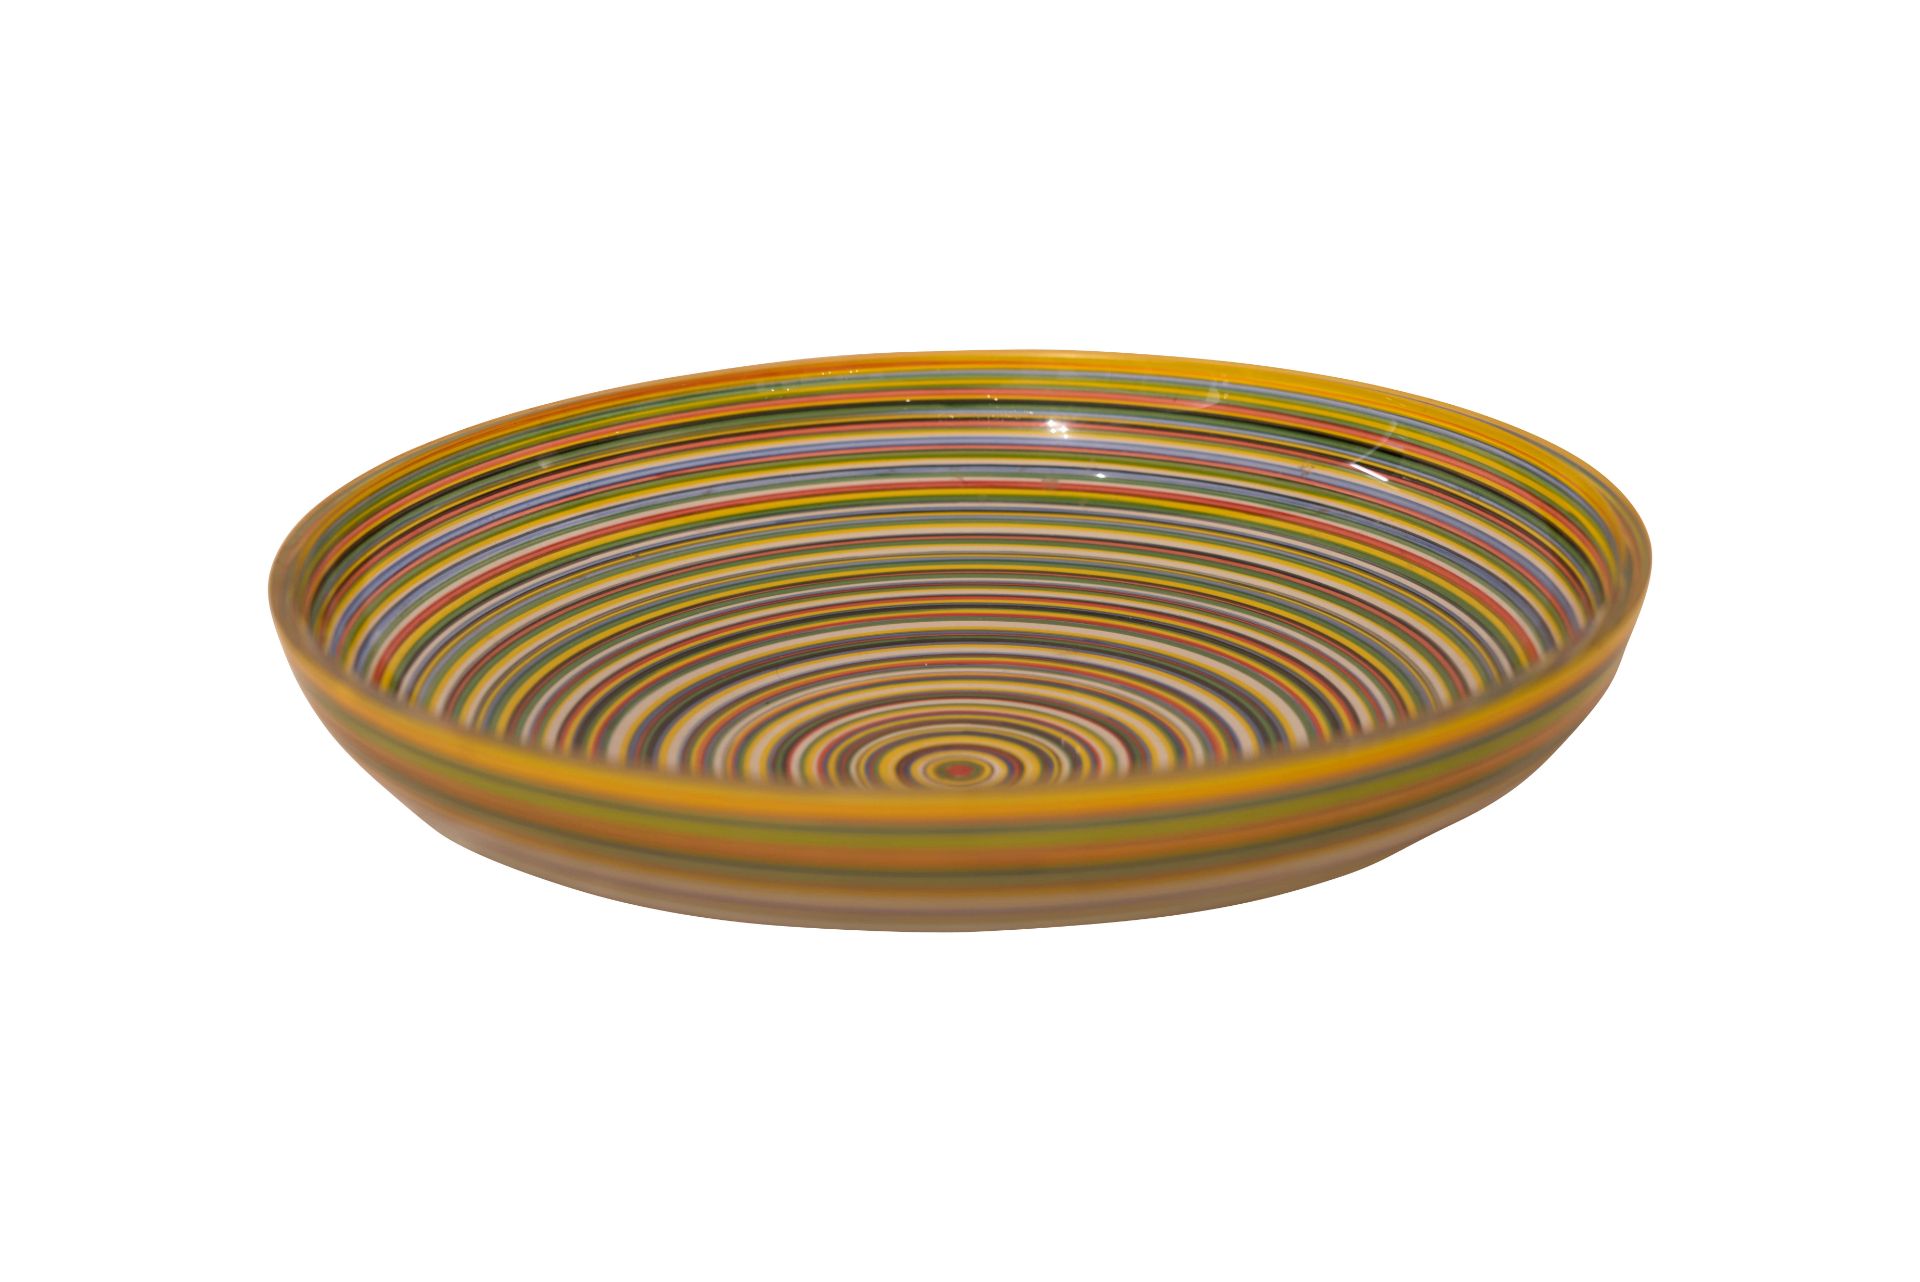 Glas Schale bunt bemalt | Glass Bowl Painted with Colorful Circles - Image 4 of 5